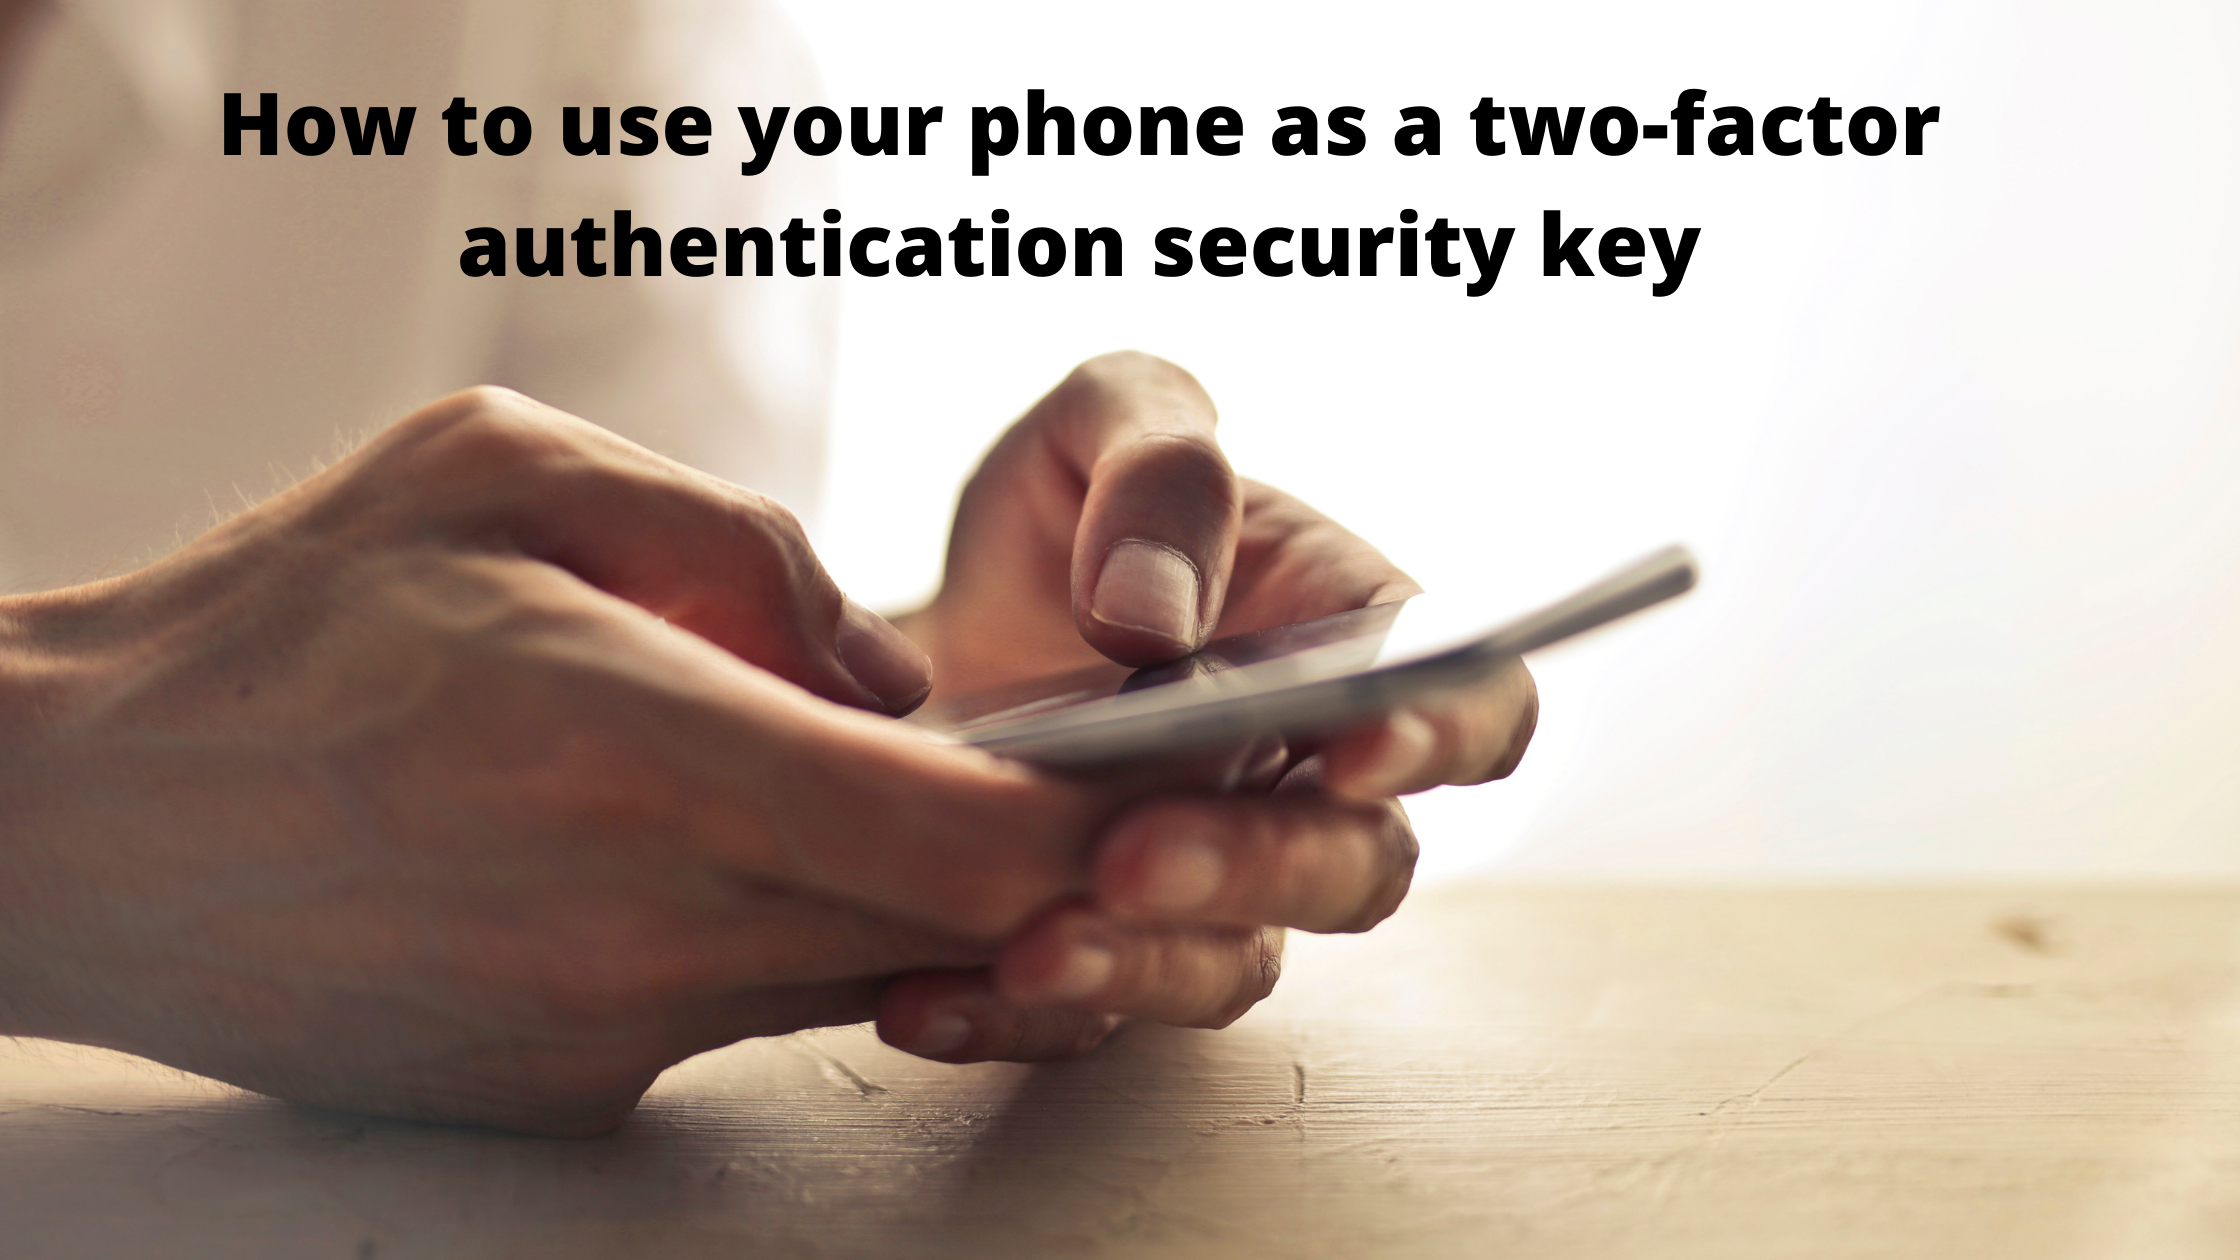 How to use your phone as a two-factor authentication security key